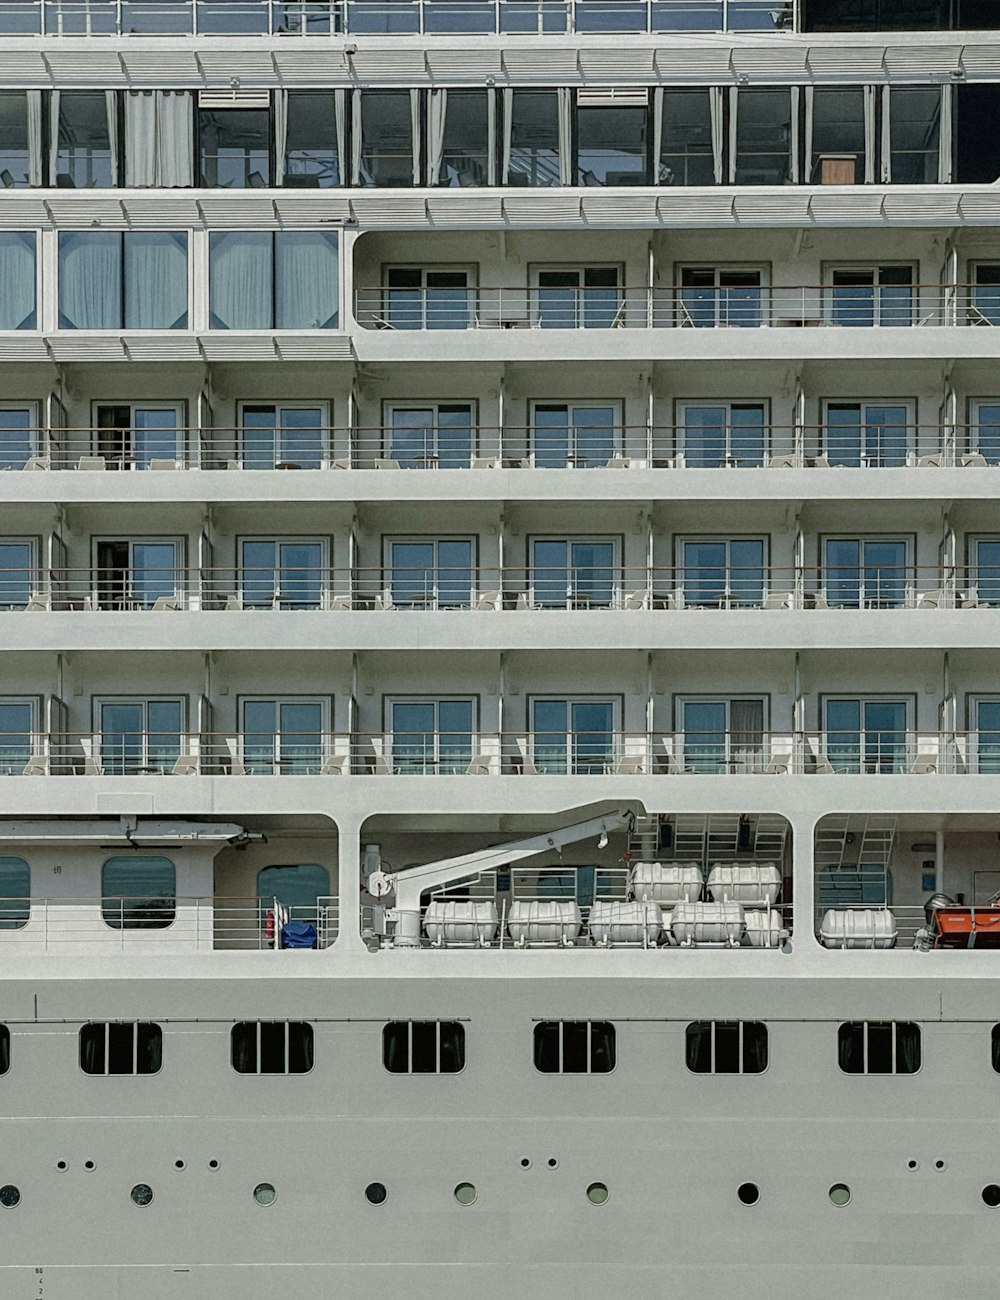 a large white cruise ship docked in a harbor